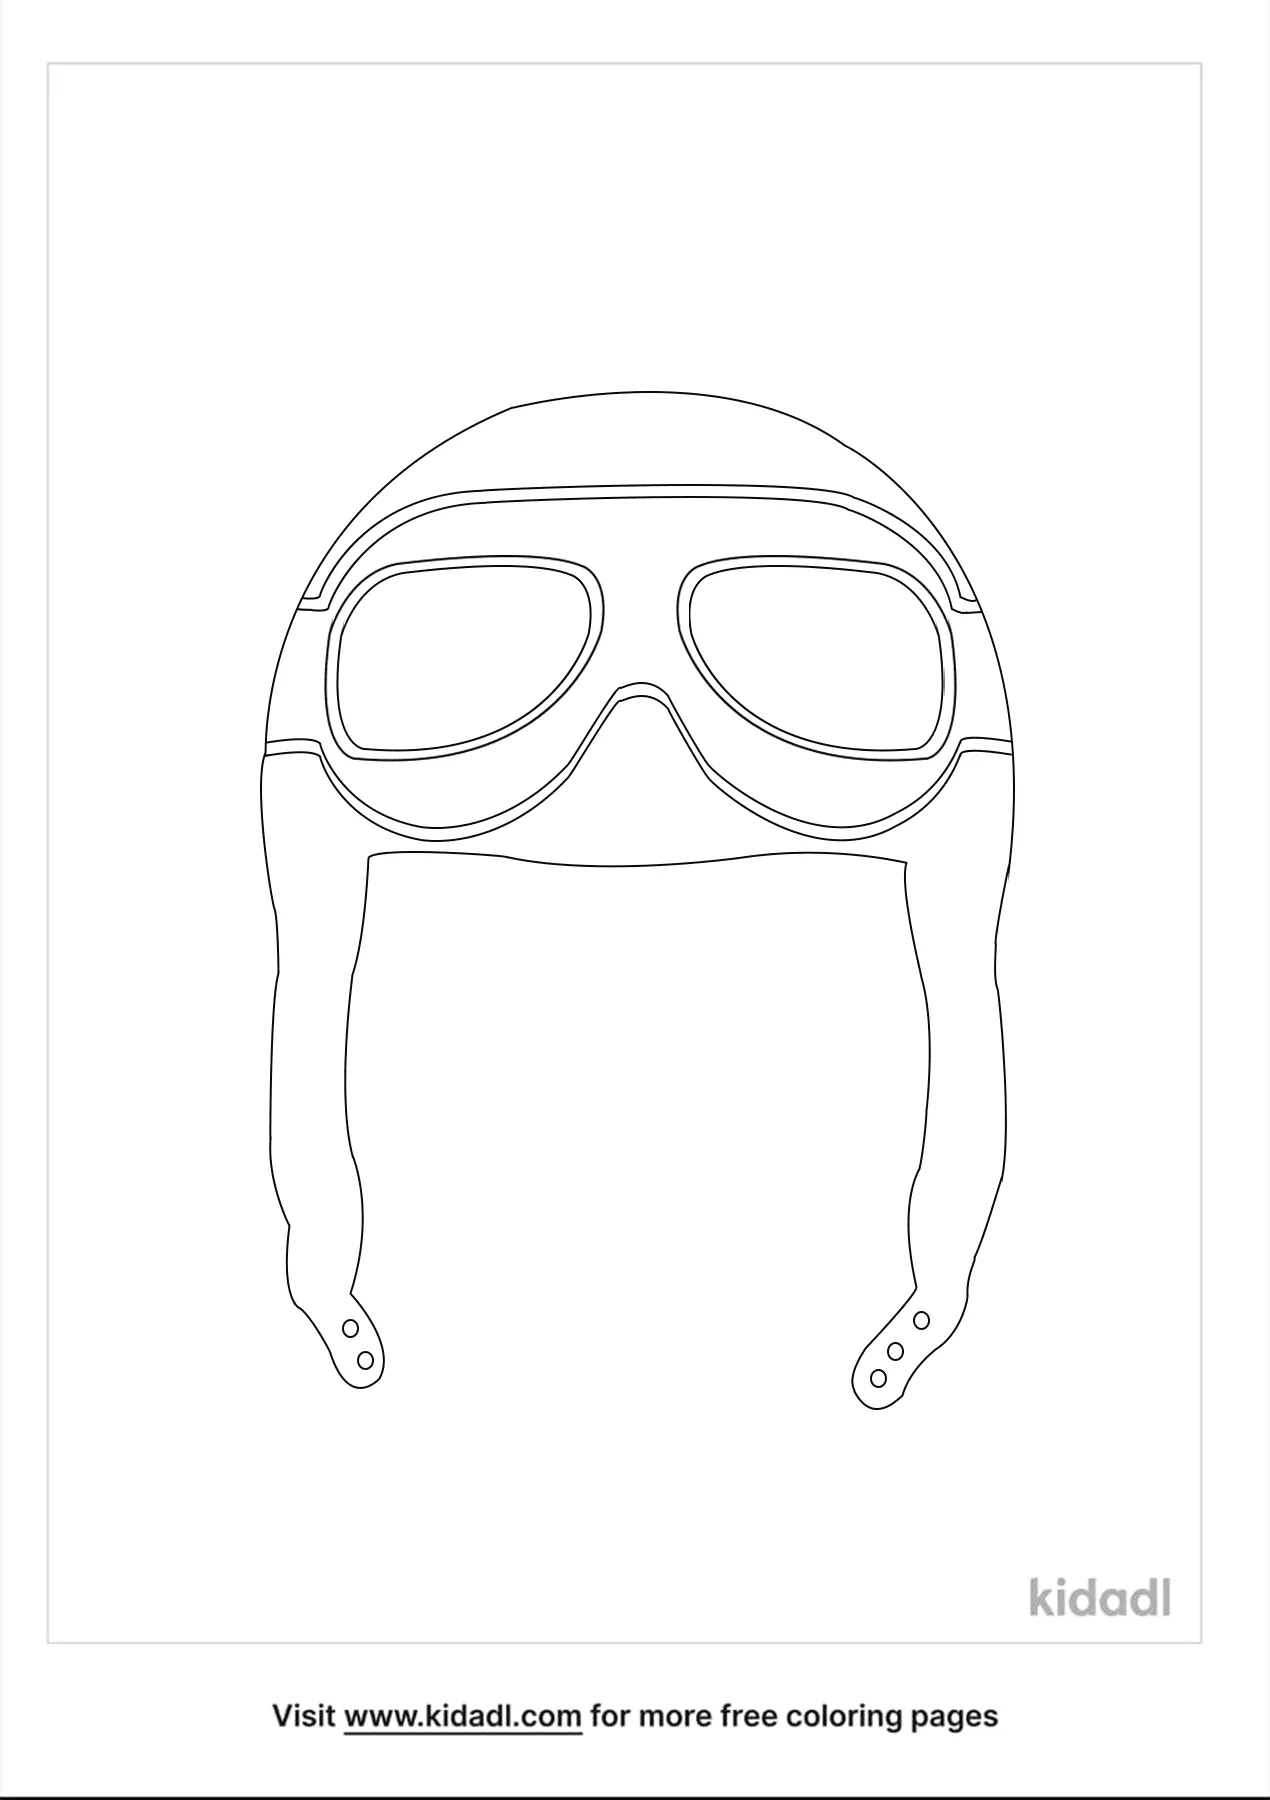 Aviator Hats And Goggles Coloring Page